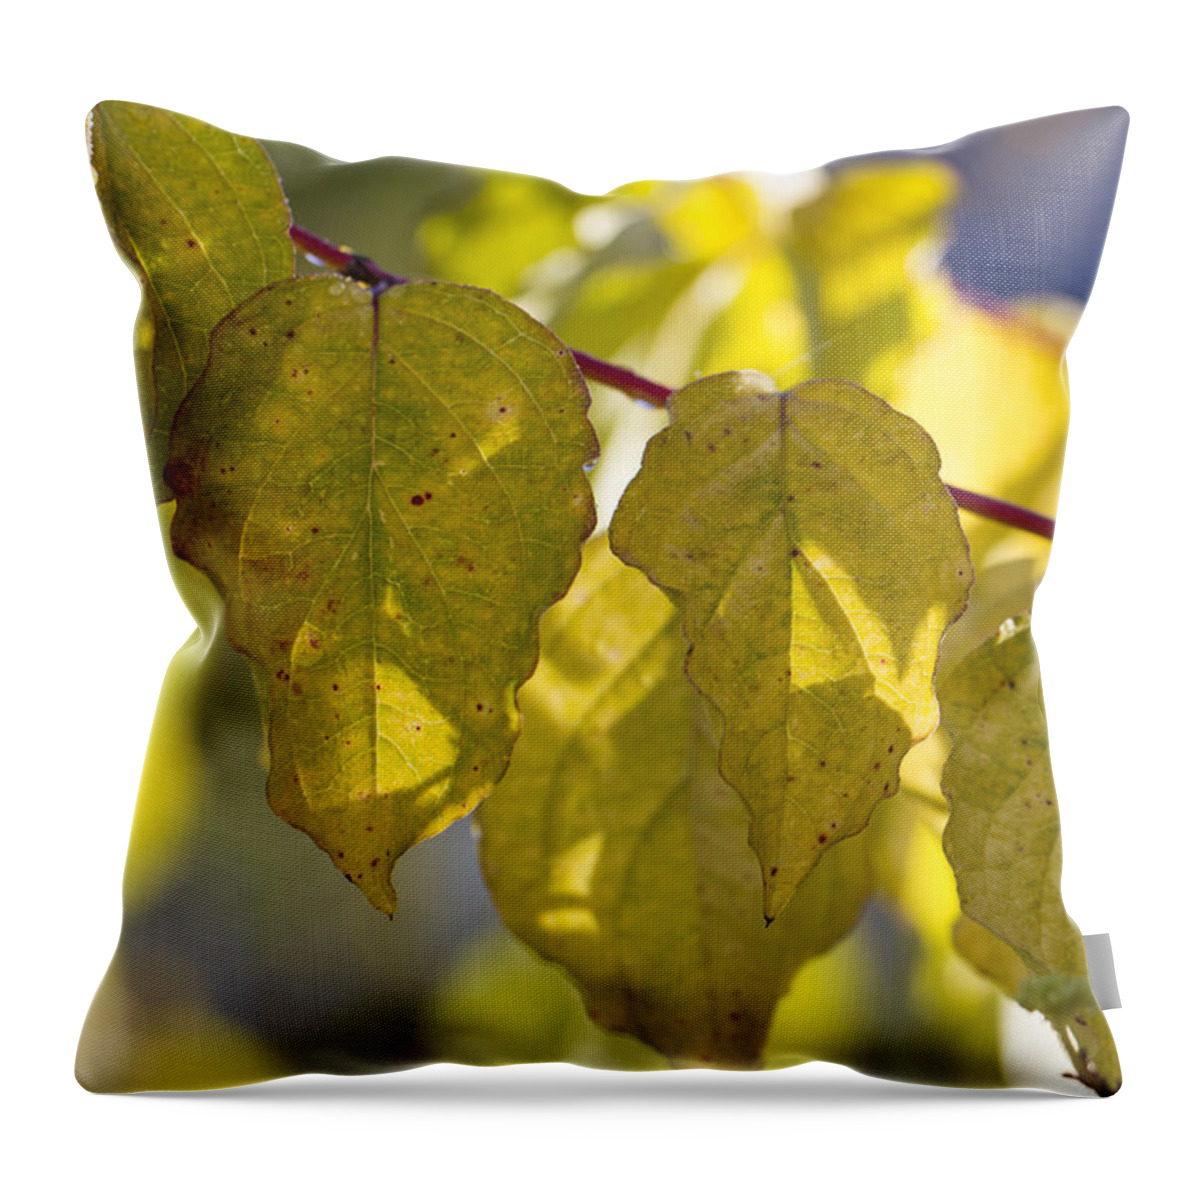 Clare Bambers Throw Pillow featuring the photograph Golden Glow. by Clare Bambers